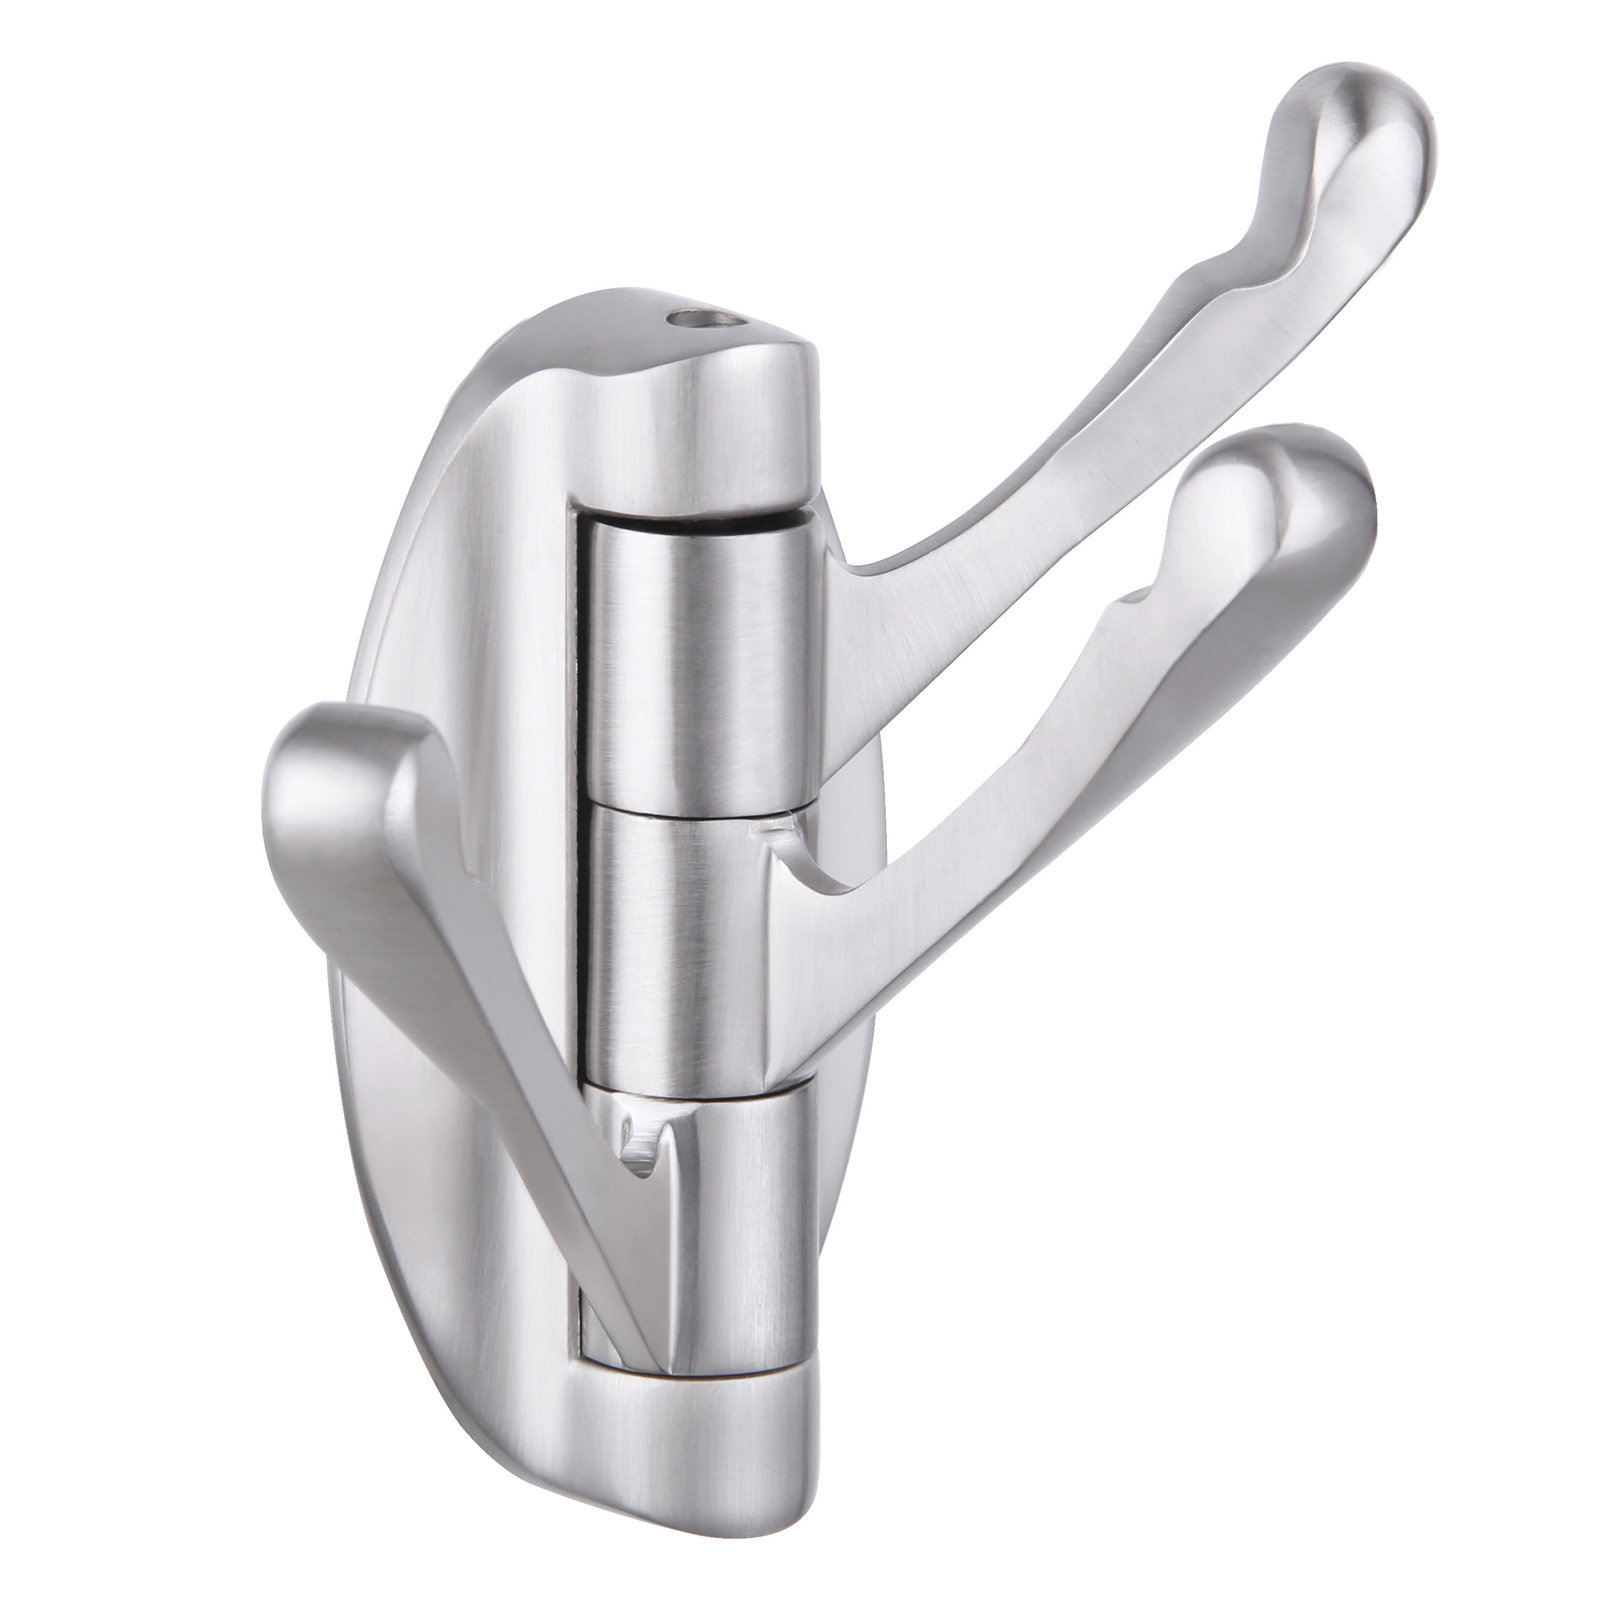 AngleSimple Single Stainless Steel Wall Mounted Towel Hook